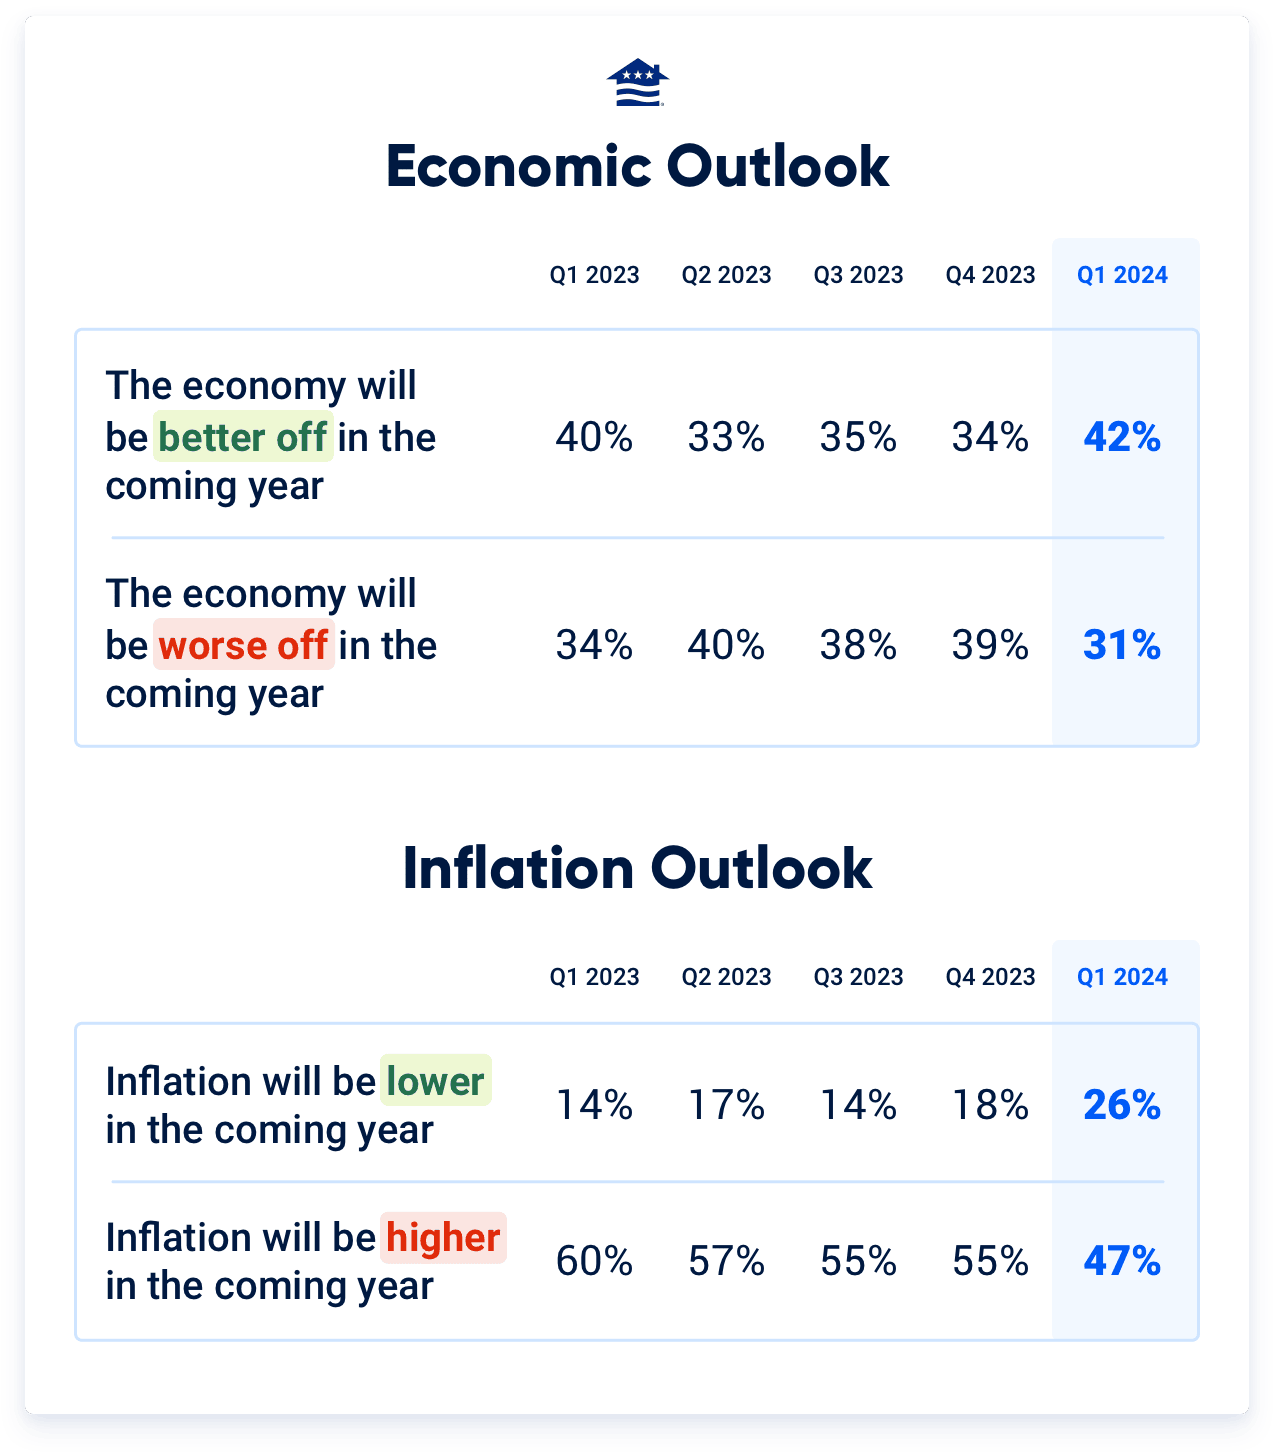 Most Veterans think their personal and the overall economic outlook will be about the same or better over the next 12 months.